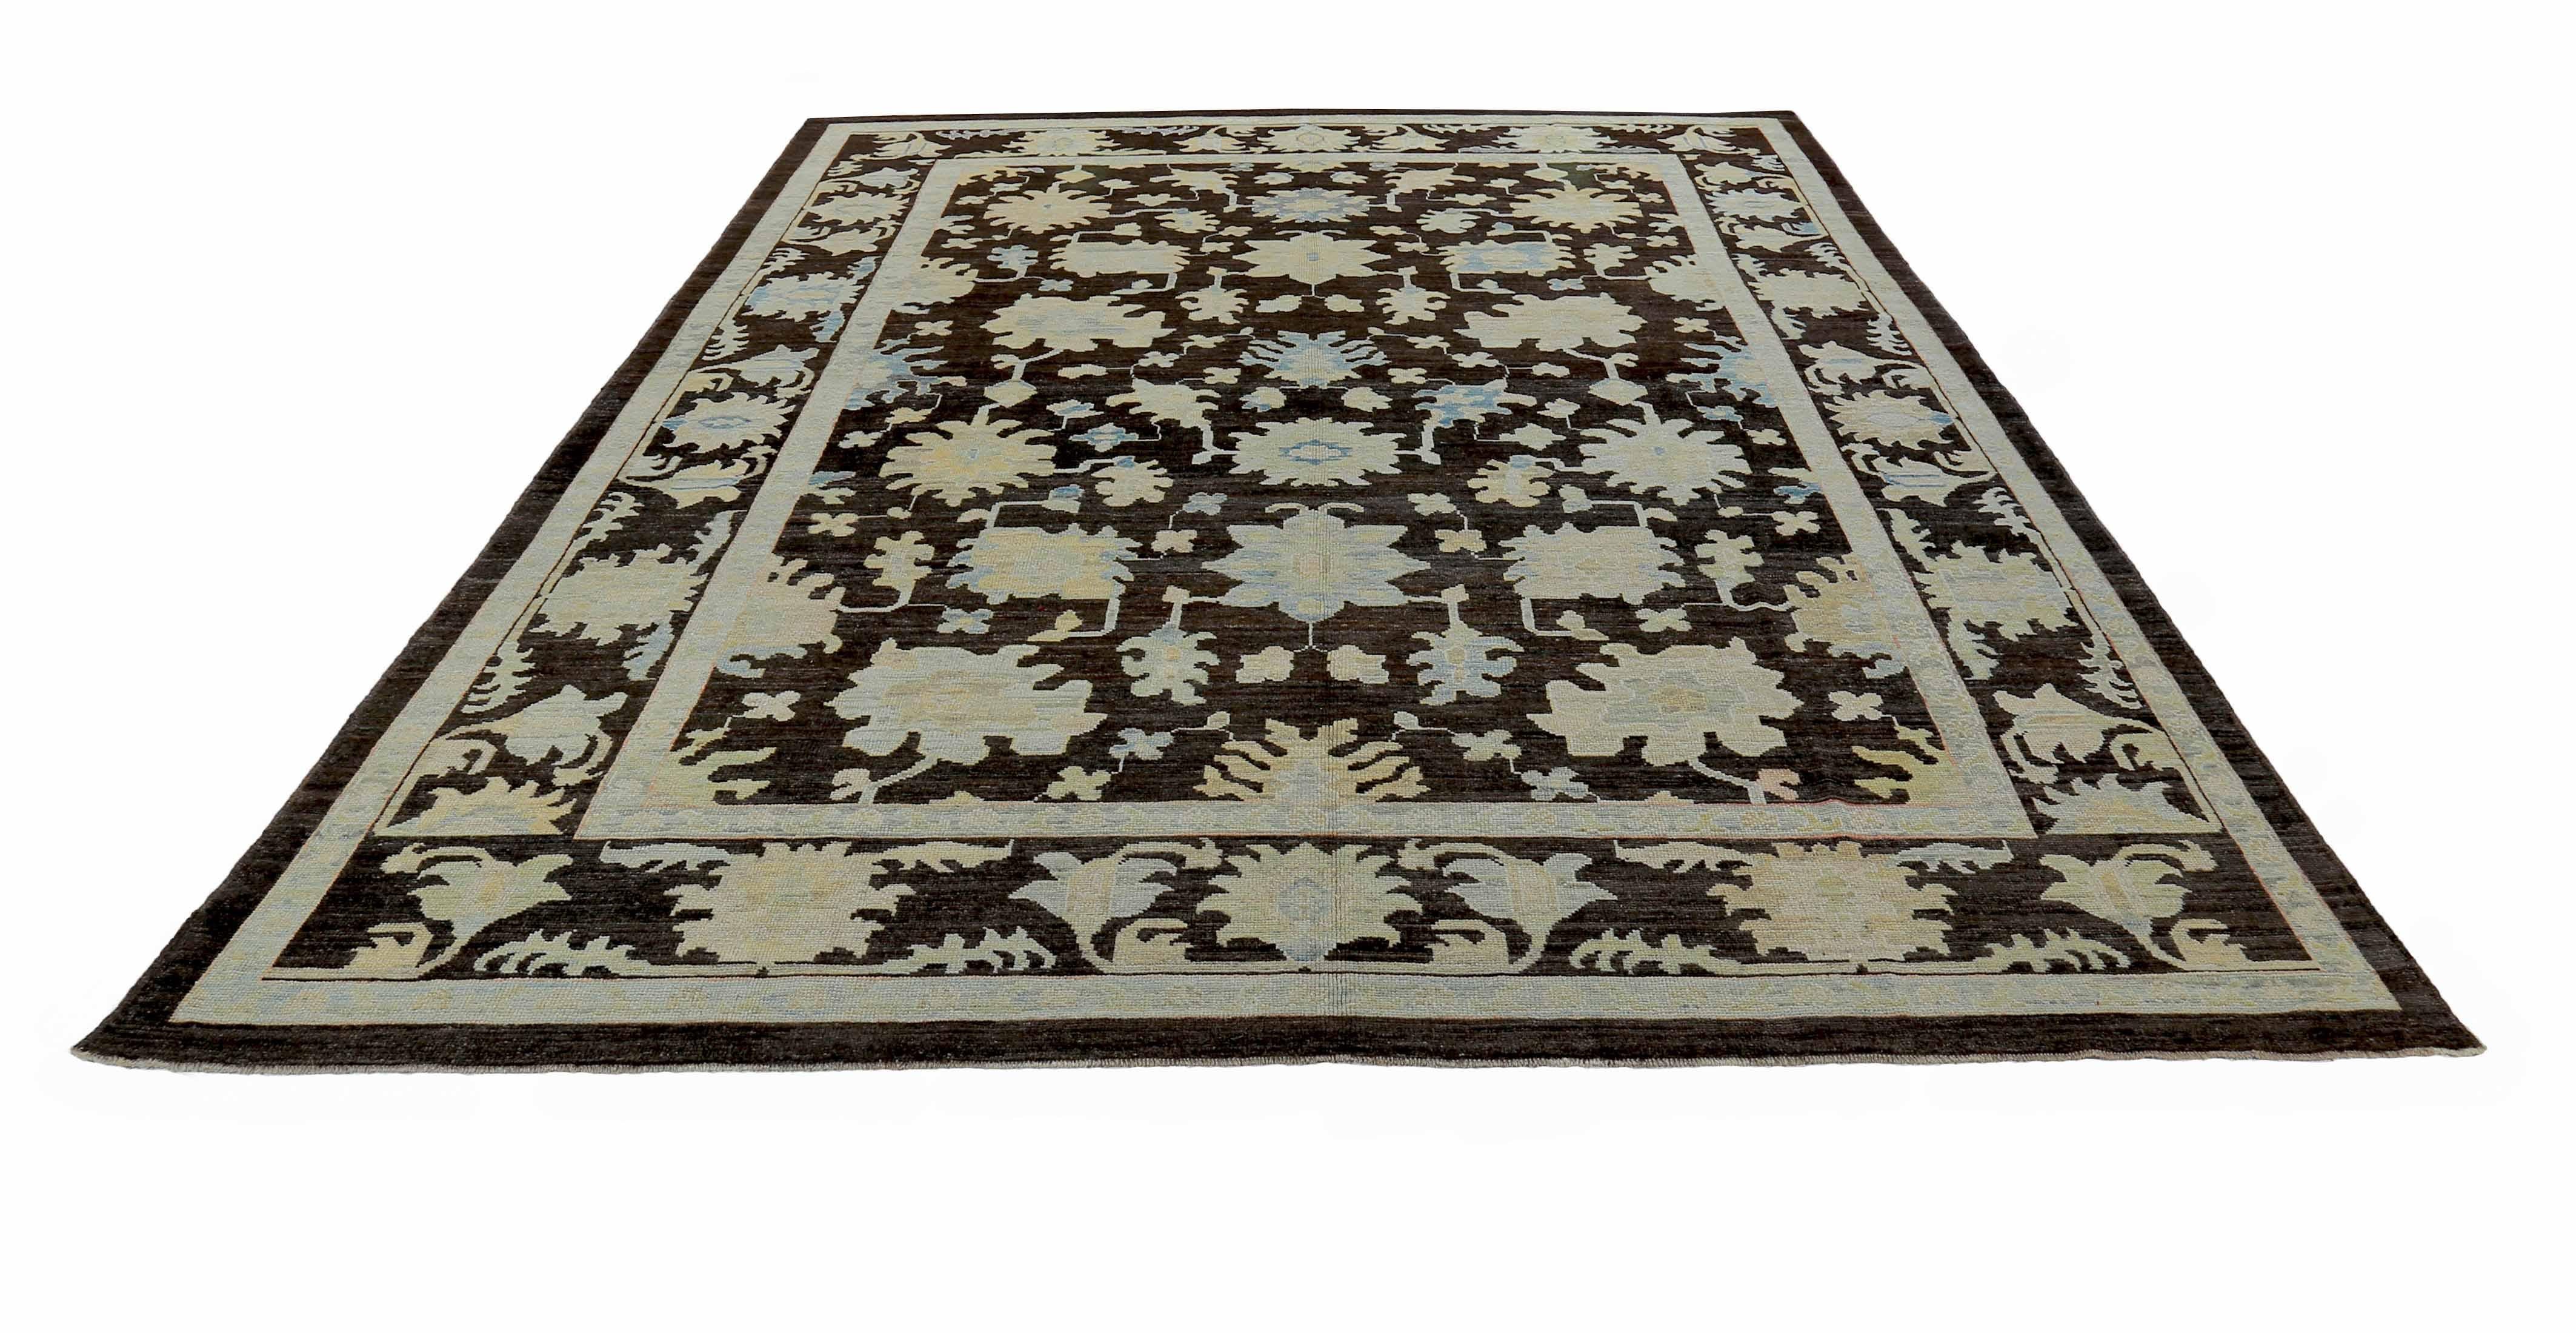 New Turkish rug made of handwoven sheep’s wool of the finest quality. It’s colored with organic vegetable dyes that are certified safe for humans and pets alike. It features blue and beige floral details on a rich dark brown field. Flower patterns